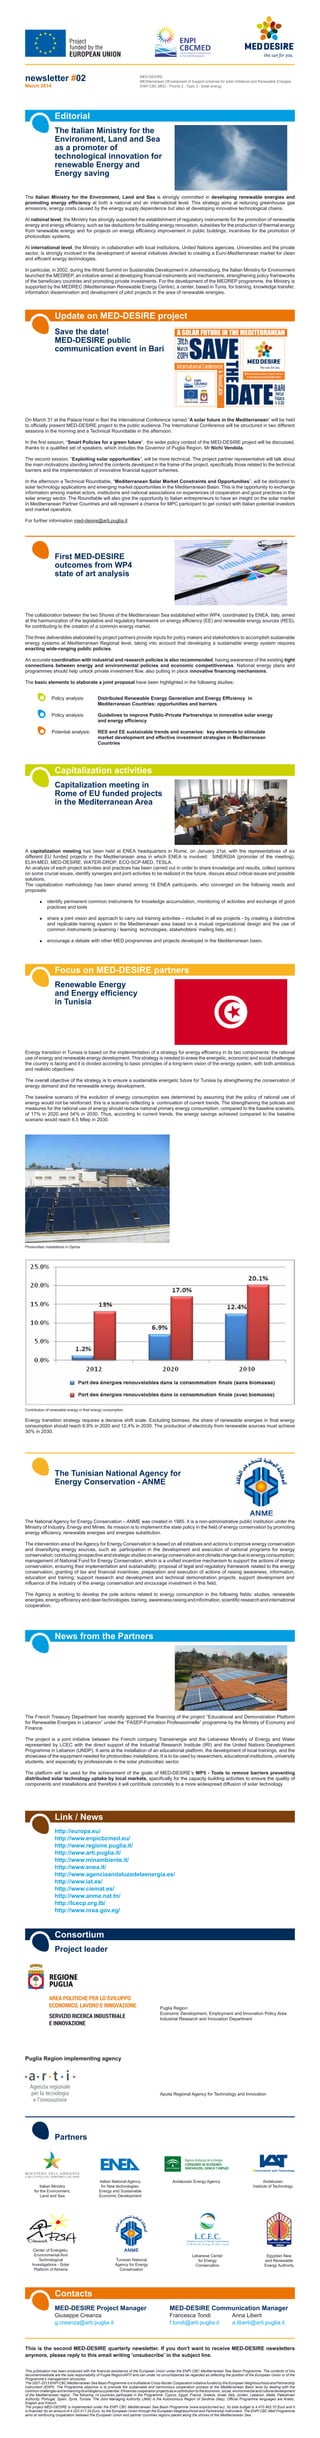 newsletter #02
March 2014
MED-DESIRE
MEDiterranean DEvelopment of Support schemes for solar Initiatives and Renewable Energies
ENPI CBC MED - Priority 2 - Topic 3 - Solar energy
This publication has been produced with the financial assistance of the European Union under the ENPI CBC Mediterranean Sea Basin Programme. The contents of this
document/website are the sole responsibility of Puglia Region/ARTI and can under no circumstances be regarded as reflecting the position of the European Union or of the
Programme’s management structures.
The 2007-2013 ENPI CBC Mediterranean Sea Basin Programme is a multilateral Cross-Border Cooperation initiative funded by the European Neighbourhood and Partnership
Instrument (ENPI). The Programme objective is to promote the sustainable and harmonious cooperation process at the Mediterranean Basin level by dealing with the
commonchallengesandenhancingitsendogenouspotential.Itfinancescooperationprojectsasacontributiontotheeconomic,social,environmentalandculturaldevelopment
of the Mediterranean region. The following 14 countries participate in the Programme: Cyprus, Egypt, France, Greece, Israel, Italy, Jordan, Lebanon, Malta, Palestinian
Authority, Portugal, Spain, Syria, Tunisia. The Joint Managing Authority (JMA) is the Autonomous Region of Sardinia (Italy). Official Programme languages are Arabic,
English and French.
The project MED-DESIRE is implemented under the ENPI CBC Mediterranean Sea Basin Programme (www.enpicbcmed.eu). Its total budget is 4.470.463,70 Euro and it
is financed, for an amount of 4.023.417,24 Euro, by the European Union through the European Neighbourhood and Partnership Instrument. The ENPI CBC Med Programme
aims at reinforcing cooperation between the European Union and partner countries regions placed along the shores of the Mediterranean Sea.
This is the second MED-DESIRE quarterly newsletter. If you don't want to receive MED-DESIRE newsletters
anymore, please reply to this email writing 'unsubscribe' in the subject line.
The Italian Ministry for the
Environment, Land and Sea
as a promoter of
technological innovation for
renewable Energy and
Energy saving
The Italian Ministry for the Environment, Land and Sea is strongly committed in developing renewable energies and
promoting energy efficiency at both a national and an international level. This strategy aims at reducing greenhouse gas
emissions, energy costs caused by the energy supply dependence but also at developing innovative technological chains.
At national level, the Ministry has strongly supported the establishment of regulatory instruments for the promotion of renewable
energy and energy efficiency, such as tax deductions for building energy renovation, subsidies for the production of thermal energy
from renewable energy and for projects on energy efficiency improvement in public buildings; incentives for the promotion of
photovoltaic systems.
At international level, the Ministry, in collaboration with local institutions, United Nations agencies, Universities and the private
sector, is strongly involved in the development of several initiatives directed to creating a Euro-Mediterranean market for clean
and efficient energy technologies.
In particular, in 2002, during the World Summit on Sustainable Development in Johannesburg, the Italian Ministry for Environment
launched the MEDREP, an initiative aimed at developing financial instruments and mechanisms, strengthening policy frameworks
of the beneficiary countries and promoting private investments. For the development of the MEDREP programme, the Ministry is
supported by the MEDREC (Mediterranean Renewable Energy Centre), a center, based in Tunis, for training, knowledge transfer,
information dissemination and development of pilot projects in the area of renewable energies.
Editorial
The French Treasury Department has recently approved the financing of the project “Educational and Demonstration Platform
for Renewable Energies in Lebanon” under the “FASEP-Formation Professionnelle” programme by the Ministry of Economy and
Finance.
The project is a joint initiative between the French company Transénergie and the Lebanese Ministry of Energy and Water
represented by LCEC with the direct support of the Industrial Research Institute (IRI) and the United Nations Development
Programme in Lebanon (UNDP). It aims at the installation of an educational platform, the development of local trainings, and the
showcase of the equipment needed for photovoltaic installations. It is to be used by researchers, educational institutions, university
students, and especially by professionals in the solar photovoltaic sector.
The platform will be used for the achievement of the goals of MED-DESIRE’s WP5 - Tools to remove barriers preventing
distributed solar technology uptake by local markets, specifically for the capacity building activities to ensure the quality of
components and installations and therefore it will contribute concretely to a more widespread diffusion of solar technology.
News from the Partners
Capitalization meeting in
Rome of EU funded projects
in the Mediterranean Area
A capitalization meeting has been held at ENEA headquarters in Rome, on January 21st, with the representatives of six
different EU funded projects in the Mediterranean area in which ENEA is involved: SINERGIA (promoter of the meeting),
ELIH-MED, MED-DESIRE, WATER-DROP, ECO-SCP-MED, TESLA.
An analysis of each project activities and practices has been carried out in order to share knowledge and results, collect opinions
on some crucial issues, identify synergies and joint activities to be realized in the future, discuss about critical issues and possible
solutions.
The capitalization methodology has been shared among 16 ENEA participants, who converged on the following needs and
proposals:
identify permanent common instruments for knowledge accumulation, monitoring of activities and exchange of good
practices and tools
share a joint vision and approach to carry out training activities – included in all six projects - by creating a distinctive
and replicable training system in the Mediterranean area based on a mutual organizational design and the use of
common instruments (e-learning / learning technologies, stakeholders’ mailing lists, etc.)
encourage a debate with other MED programmes and projects developed in the Mediterranean basin.
•
•
•
Capitalization activities
http://europa.eu/
http://www.enpicbcmed.eu/
http://www.regione.puglia.it/
http://www.arti.puglia.it/
http://www.minambiente.it/
http://www.enea.it/
http://www.agenciaandaluzadelaenergia.es/
http://www.iat.es/
http://www.ciemat.es/
http://www.anme.nat.tn/
http://lcecp.org.lb/
http://www.nrea.gov.eg/
Link / News
AREA POLITICHE PER LO SVILUPPO
ECONOMICO, LAVORO E INNOVAZIONE
SERVIZIO RICERCA INDUSTRIALE
E INNOVAZIONE
Puglia Region
Economic Development, Employment and Innovation Policy Area
Industrial Research and Innovation Department
Apulia Regional Agency for Technology and Innovation
Puglia Region implementing agency
Project leader
Consortium
Italian Ministry
for the Environment,
Land and Sea
Italian National Agency
for New technologies,
Energy and Sustainable
Economic Development
Center of Energetic,
Environmental And
Technological
Investigations - Solar
Platform of Almeria
Tunisian National
Agency for Energy
Conservation
Lebanese Center
for Energy
Conservation
Egyptian New
and Renewable
Energy Authority
Partners
Andalusian
Institute of Technology
MED-DESIRE Project Manager
Giuseppe Creanza
g.creanza@arti.puglia.it
Contacts
MED-DESIRE Communication Manager
Francesca Tondi Anna Liberti
f.tondi@arti.puglia.it a.liberti@arti.puglia.it
Andalusian Energy Agency
First MED-DESIRE
outcomes from WP4
state of art analysis
The collaboration between the two Shores of the Mediterranean Sea established within WP4, coordinated by ENEA, Italy, aimed
at the harmonization of the legislative and regulatory framework on energy efficiency (EE) and renewable energy sources (RES),
for contributing to the creation of a common energy market.
The three deliverables elaborated by project partners provide inputs for policy makers and stakeholders to accomplish sustainable
energy systems at Mediterranean Regional level, taking into account that developing a sustainable energy system requires
enacting wide-ranging public policies.
An accurate coordination with industrial and research policies is also recommended, having awareness of the existing tight
connections between energy and environmental policies and economic competitiveness. National energy plans and
programmes should help unlock private investment flow, also putting in place innovative financing mechanisms.
The basic elements to elaborate a joint proposal have been highlighted in the following studies:
Policy analysis:
Policy analysis:
Potential analysis:
Distributed Renewable Energy Generation and Energy Efficiency in
Mediterranean Countries: opportunities and barriers
Guidelines to improve Public-Private Partnerships in innovative solar energy
and energy efficiency
RES and EE sustainable trends and scenarios: key elements to stimulate
market development and effective investment strategies in Mediterranean
Countries
The Tunisian National Agency for
Energy Conservation - ANME
The National Agency for Energy Conservation – ANME was created in 1985. It is a non-administrative public institution under the
Ministry of Industry, Energy and Mines. Its mission is to implement the state policy in the field of energy conservation by promoting
energy efficiency, renewable energies and energies substitution.
The intervention area of the Agency for Energy Conservation is based on all initiatives and actions to improve energy conservation
and diversifying energy sources, such as: participation in the development and execution of national programs for energy
conservation;conductingprospectiveandstrategicstudiesonenergyconservationandclimatechangeduetoenergyconsumption;
management of National Fund for Energy Conservation, which is a unified incentive mechanism to support the actions of energy
conservation, ensuring their implementation and sustainability; proposal of legal and regulatory framework related to the energy
conservation; granting of tax and financial incentives; preparation and execution of actions of raising awareness, information,
education and training; support research and development and technical demonstration projects; support development and
influence of the industry of the energy conservation and encourage investment in this field.
The Agency is working to develop the pole actions related to energy consumption in the following fields: studies, renewable
energies,energyefficiencyandcleantechnologies,training,awarenessraisingandinformation,scientificresearchandinternational
cooperation.
Renewable Energy
and Energy efficiency
in Tunisia
Energy transition in Tunisia is based on the implementation of a strategy for energy efficiency in its two components: the rational
use of energy and renewable energy development. This strategy is needed to erase the energetic, economic and social challenges
the country is facing and it is divided according to basic principles of a long-term vision of the energy system, with both ambitious
and realistic objectives.
The overall objective of the strategy is to ensure a sustainable energetic future for Tunisia by strengthening the conservation of
energy demand and the renewable energy development.
The baseline scenario of the evolution of energy consumption was determined by assuming that the policy of rational use of
energy would not be reinforced: this is a scenario reflecting a continuation of current trends. The strengthening the policies and
measures for the rational use of energy should reduce national primary energy consumption, compared to the baseline scenario,
of 17% in 2020 and 34% in 2030. Thus, according to current trends, the energy savings achieved compared to the baseline
scenario would reach 6.5 Mtep in 2030.
Energy transition strategy requires a decisive shift scale. Excluding biomass, the share of renewable energies in final energy
consumption should reach 6.9% in 2020 and 12.4% in 2030. The production of electricity from renewable sources must achieve
30% in 2030.
Focus on MED-DESIRE partners
Photovoltaic installations in Djerba
Contribution of renewable energy in final energy consumption
Update on MED-DESIRE project
Save the date!
MED-DESIRE public
communication event in Bari
On March 31 at the Palace Hotel in Bari the International Conference named “A solar future in the Mediterranean” will be held
to officially present MED-DESIRE project to the public audience.The International Conference will be structured in two different
sessions in the morning and a Technical Roundtable in the afternoon.
In the first session, “Smart Policies for a green future”, the wider policy context of the MED-DESIRE project will be discussed,
thanks to a qualified set of speakers, which includes the Governor of Puglia Region, Mr Nichi Vendola.
The second session, “Exploiting solar opportunities”, will be more technical. The project partner representative will talk about
the main motivations standing behind the contents developed in the frame of the project, specifically those related to the technical
barriers and the implementation of innovative financial support schemes.
In the afternoon a Technical Roundtable, “Mediterranean Solar Market Constraints and Opportunities”, will be dedicated to
solar technology applications and emerging market opportunities in the Mediterranean Basin. This is the opportunity to exchange
information among market actors, institutions and national associations on experiences of cooperation and good practices in the
solar energy sector. The Roundtable will also give the opportunity to Italian entrepreneurs to have an insight on the solar market
in Mediterranean Partner Countries and will represent a chance for MPC participant to get contact with Italian potential investors
and market operators.
For further information med-desire@arti.puglia.it
 